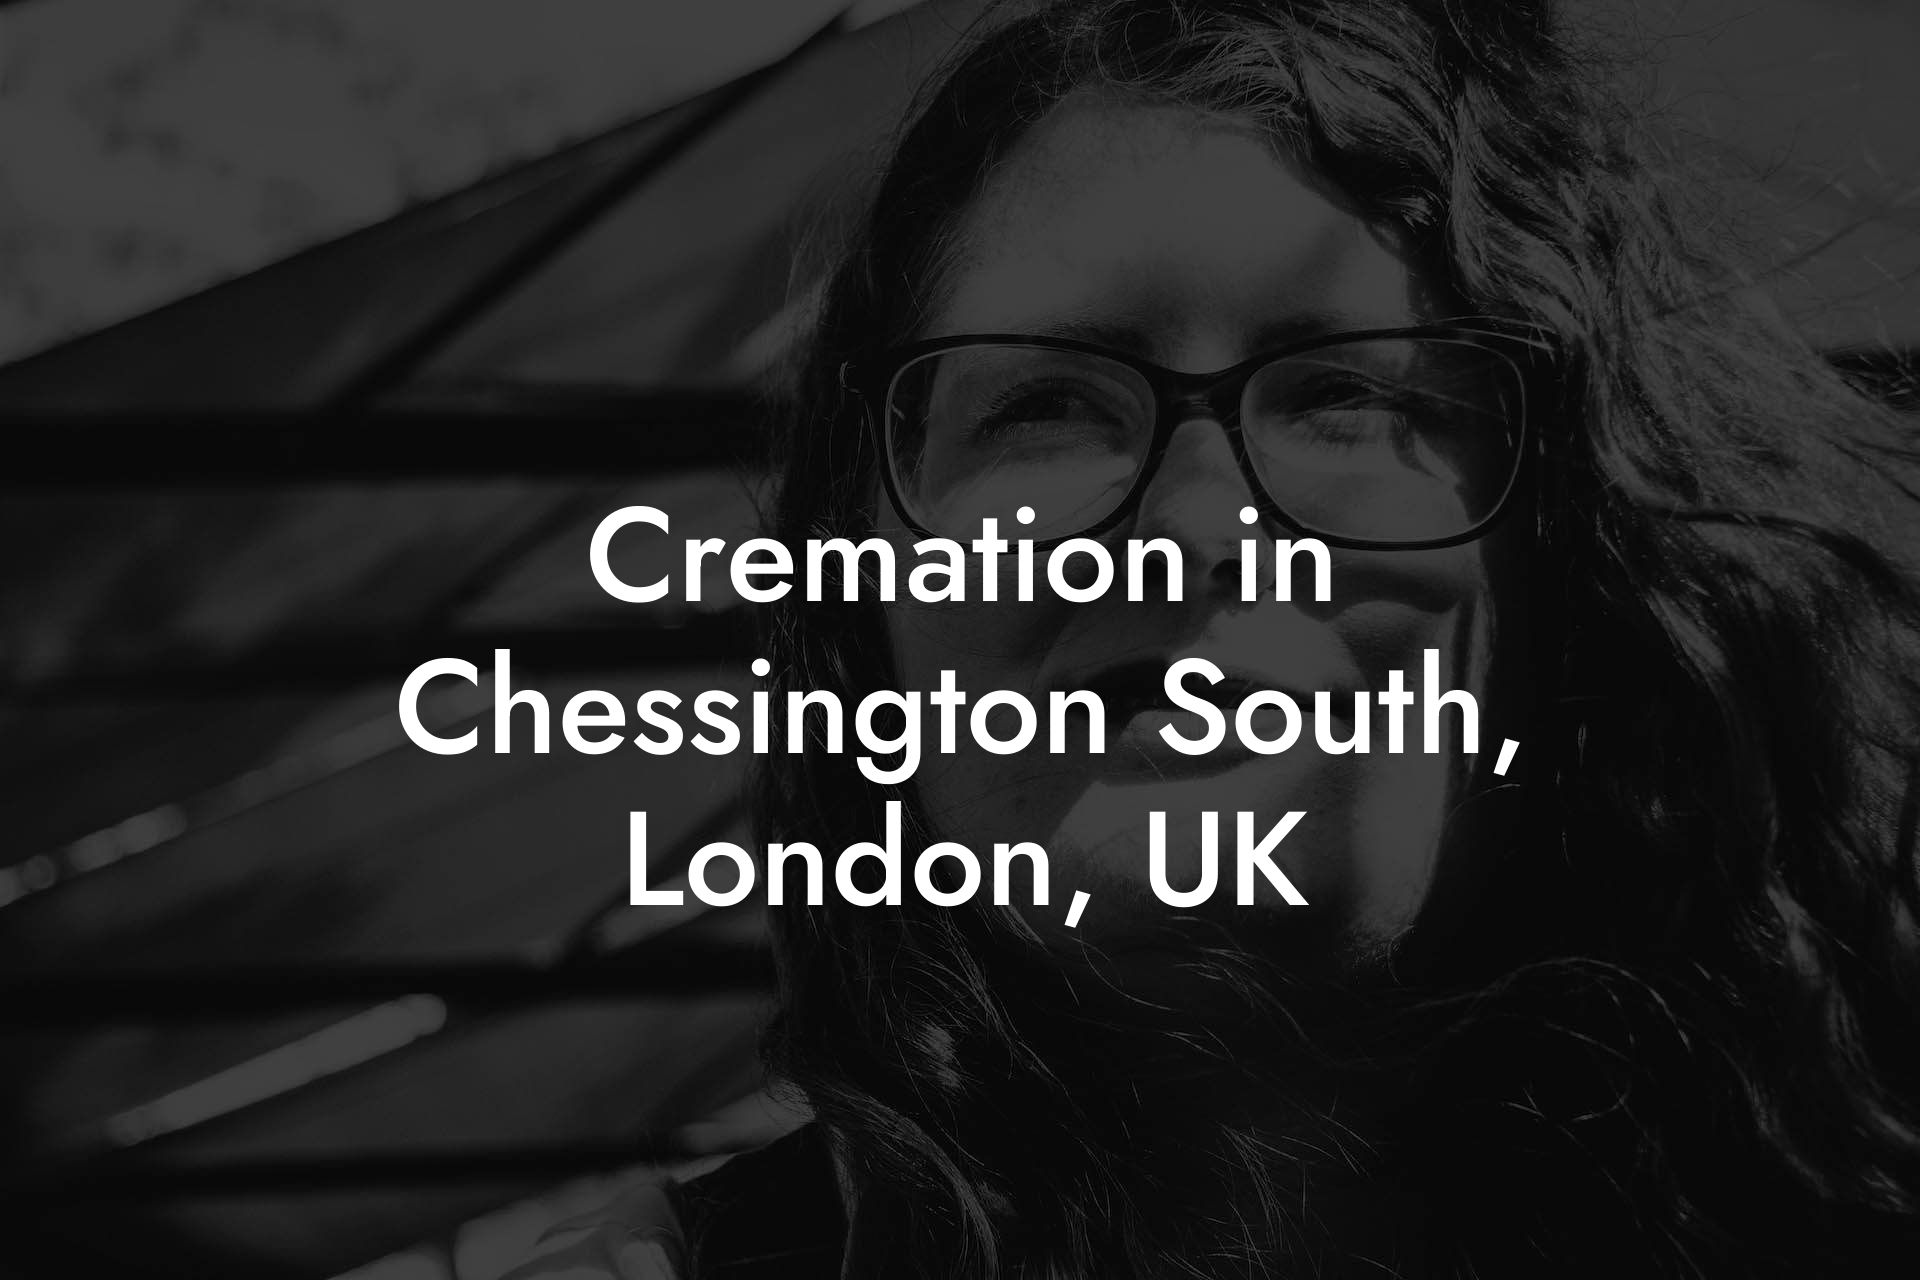 Cremation in Chessington South, London, UK